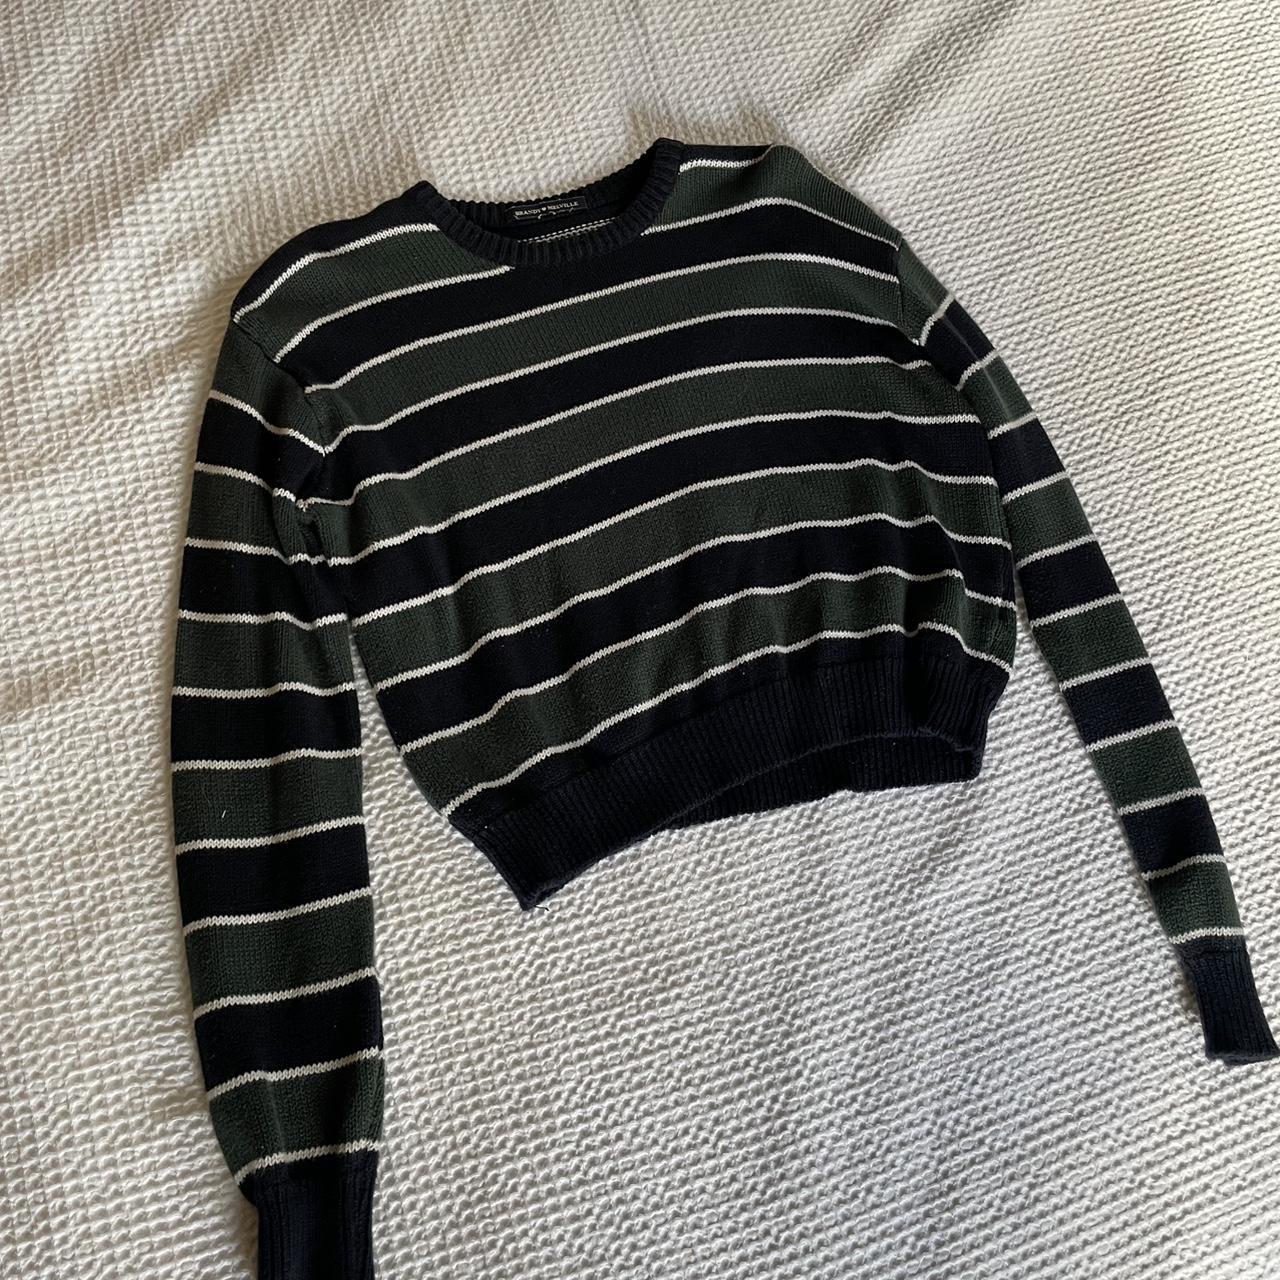 Brandy Melville White with Navy Stripes Long Sleeve Top Semi